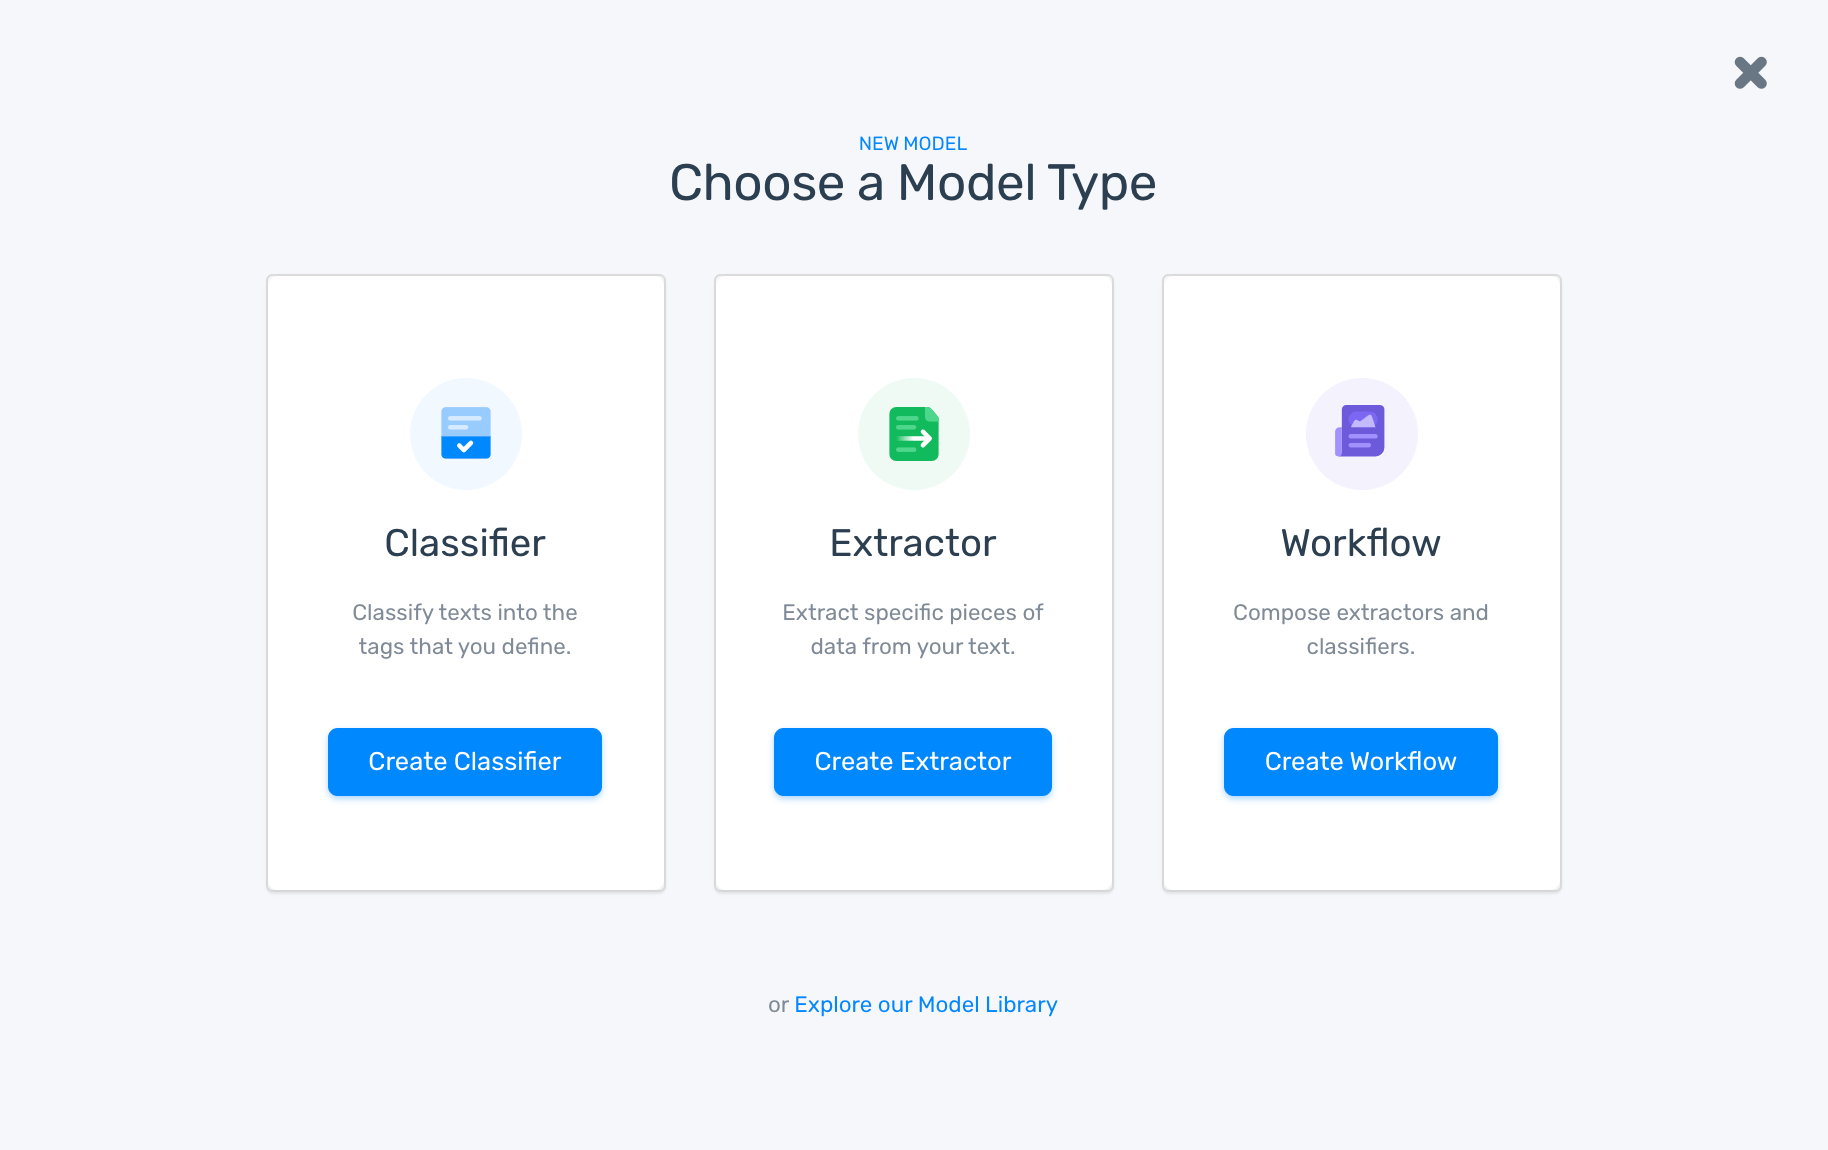 The option to choose Classifier or Extractor for your model (that you'll call with Python).